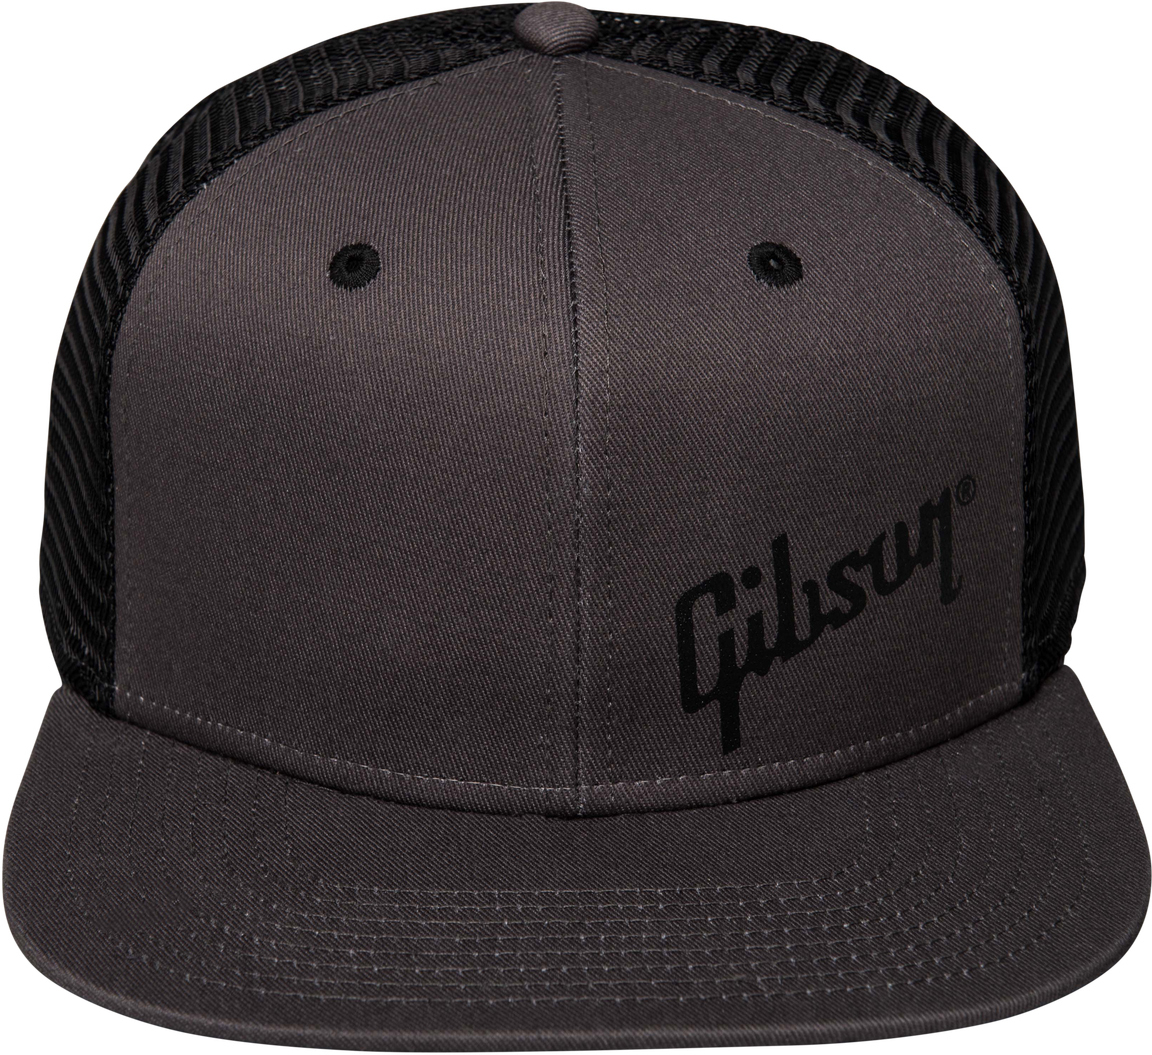 Gibson Charcoal Trucker Snapback - Taille Unique - Gorra - Main picture